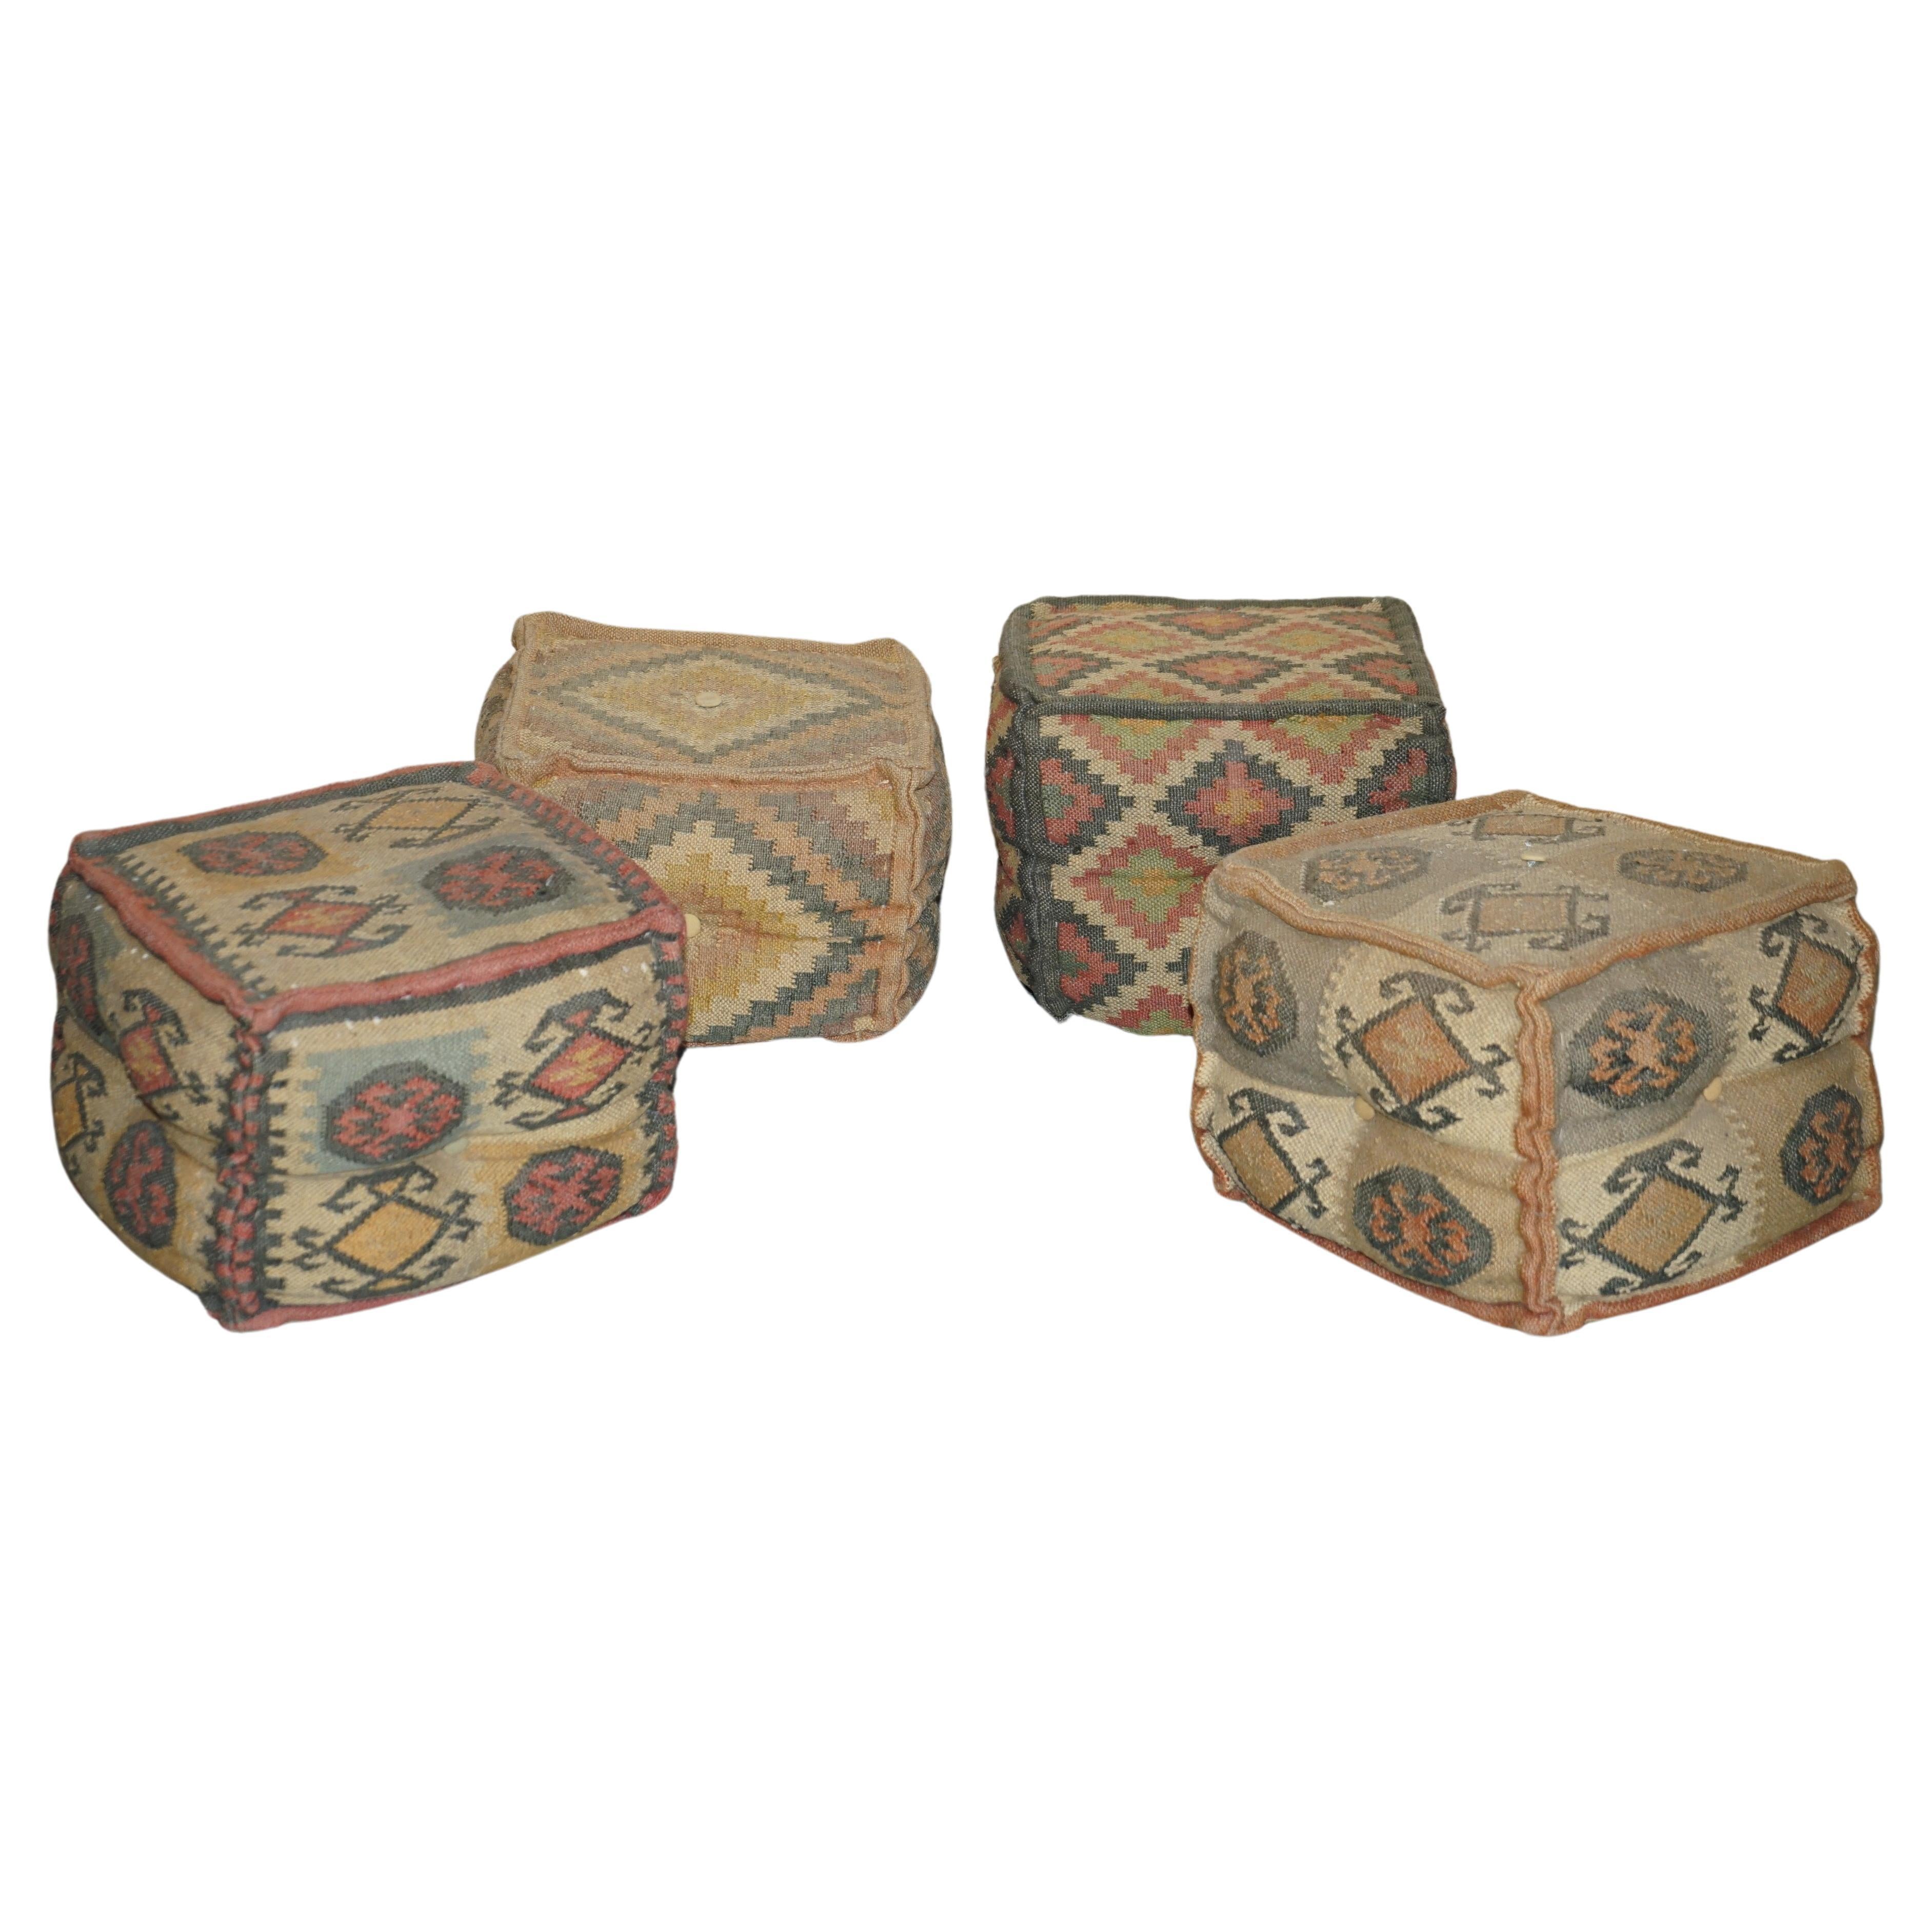 Suite of 4 Vintage circa 1960's George Smith Style Kilim Footstool Cube Stools For Sale